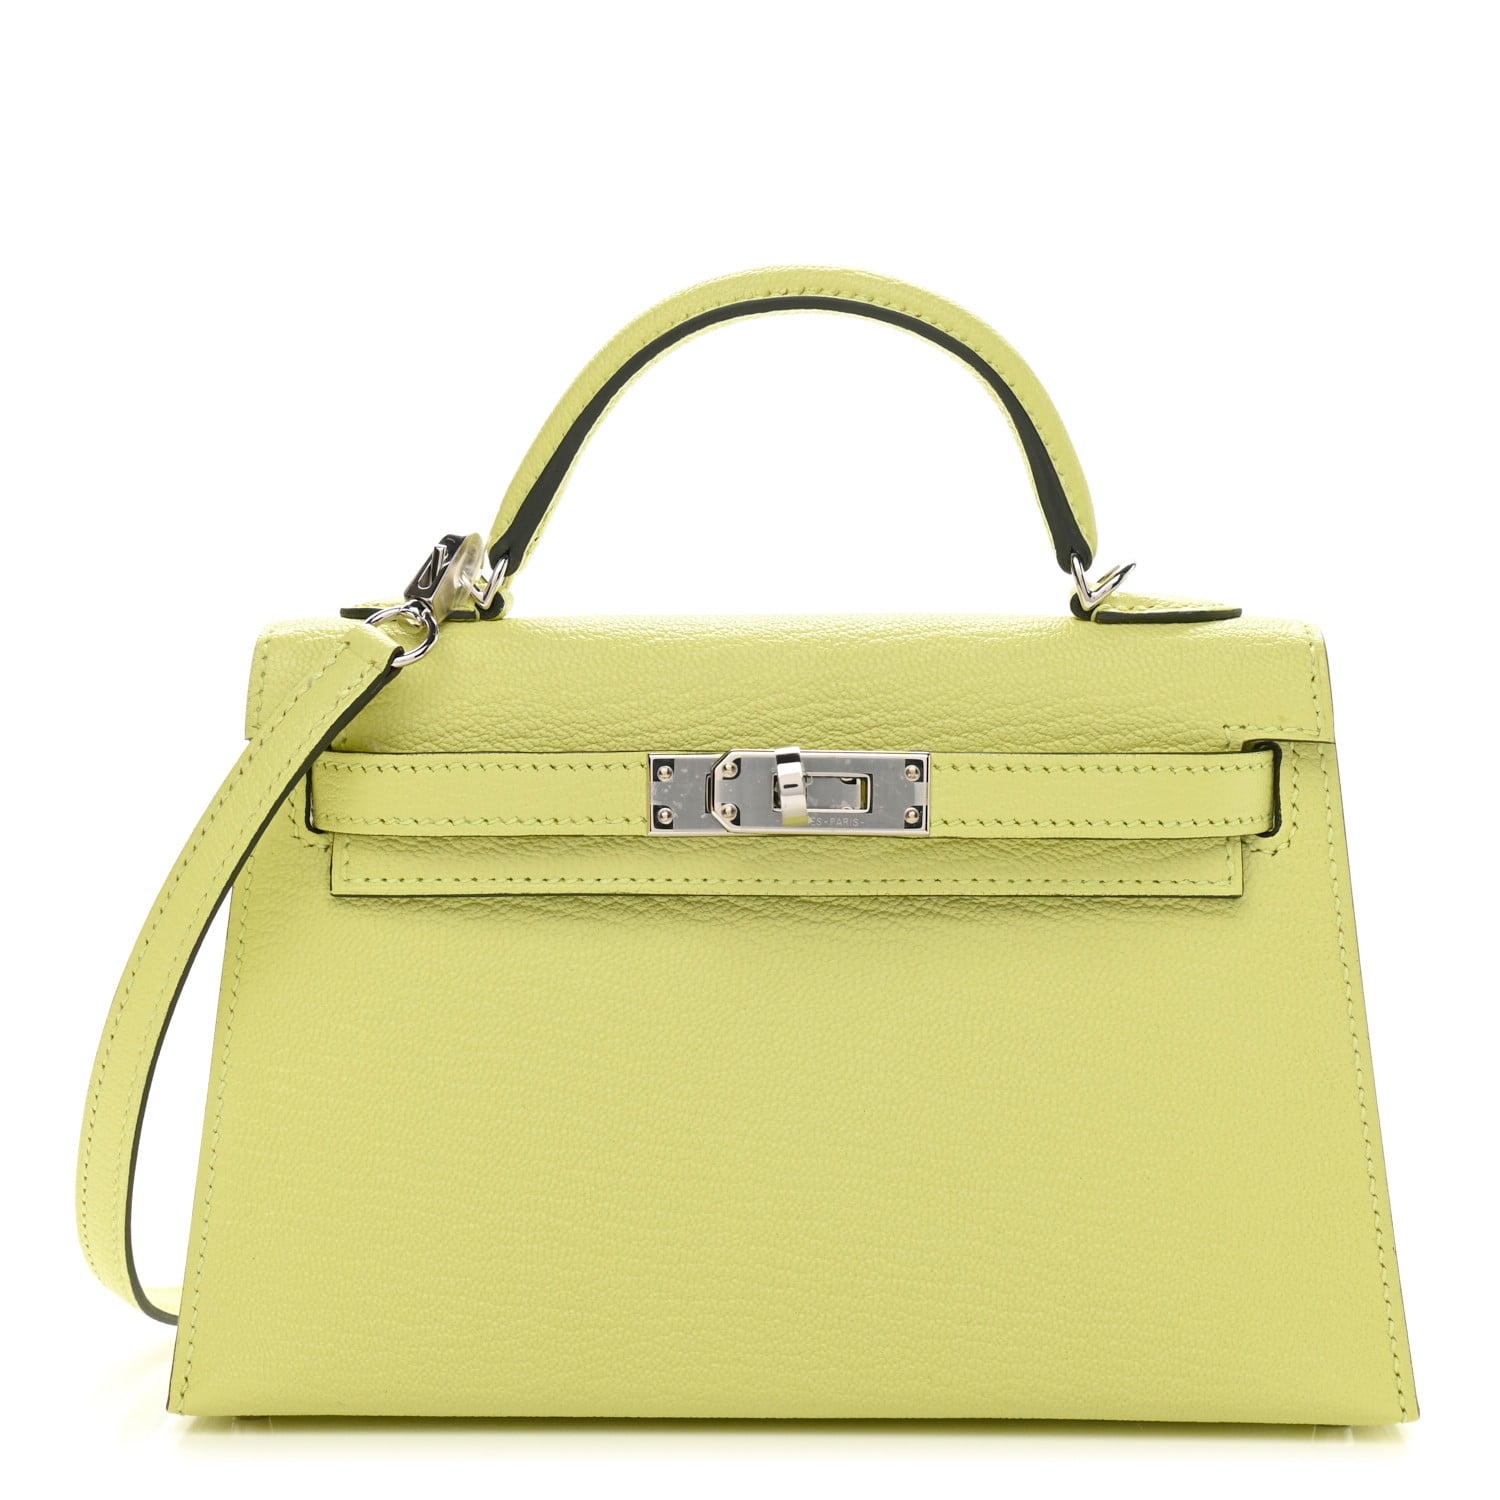 Official news of new Hermes Kelly Mini and its darling details